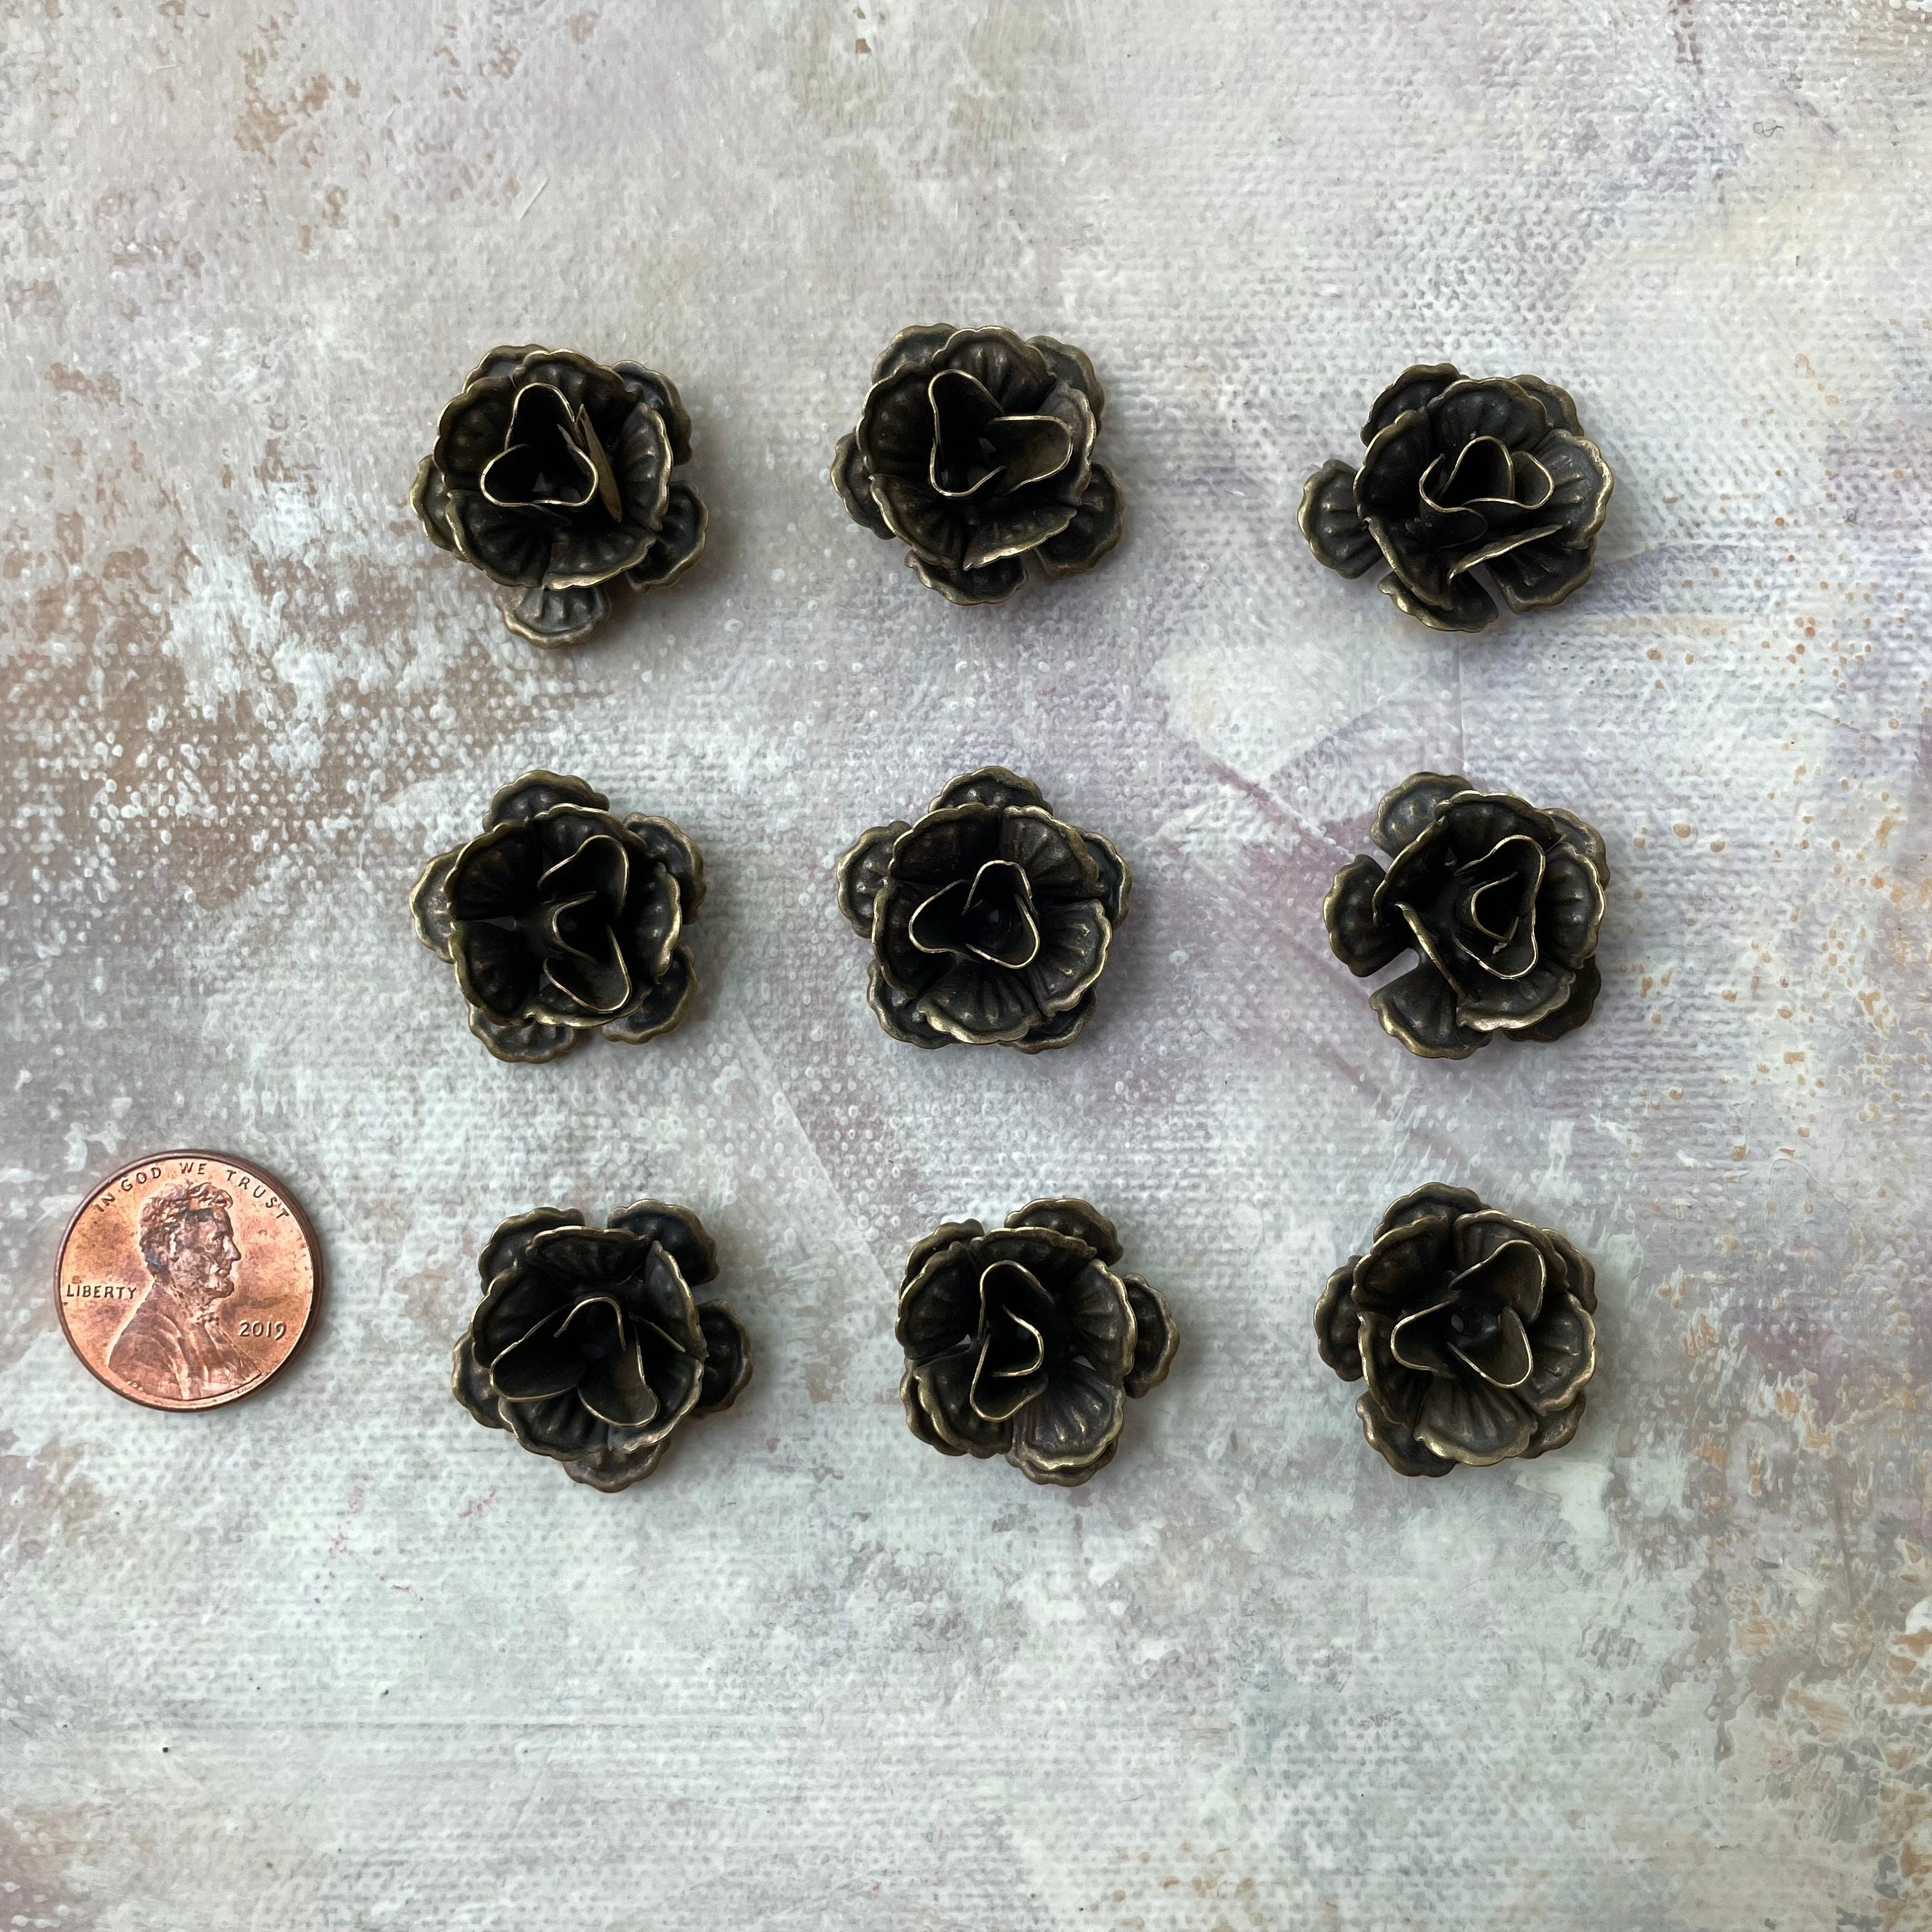 9 mini bronze styling flowers with penny beside for size reference - Flat lay props from Champagne & GRIT